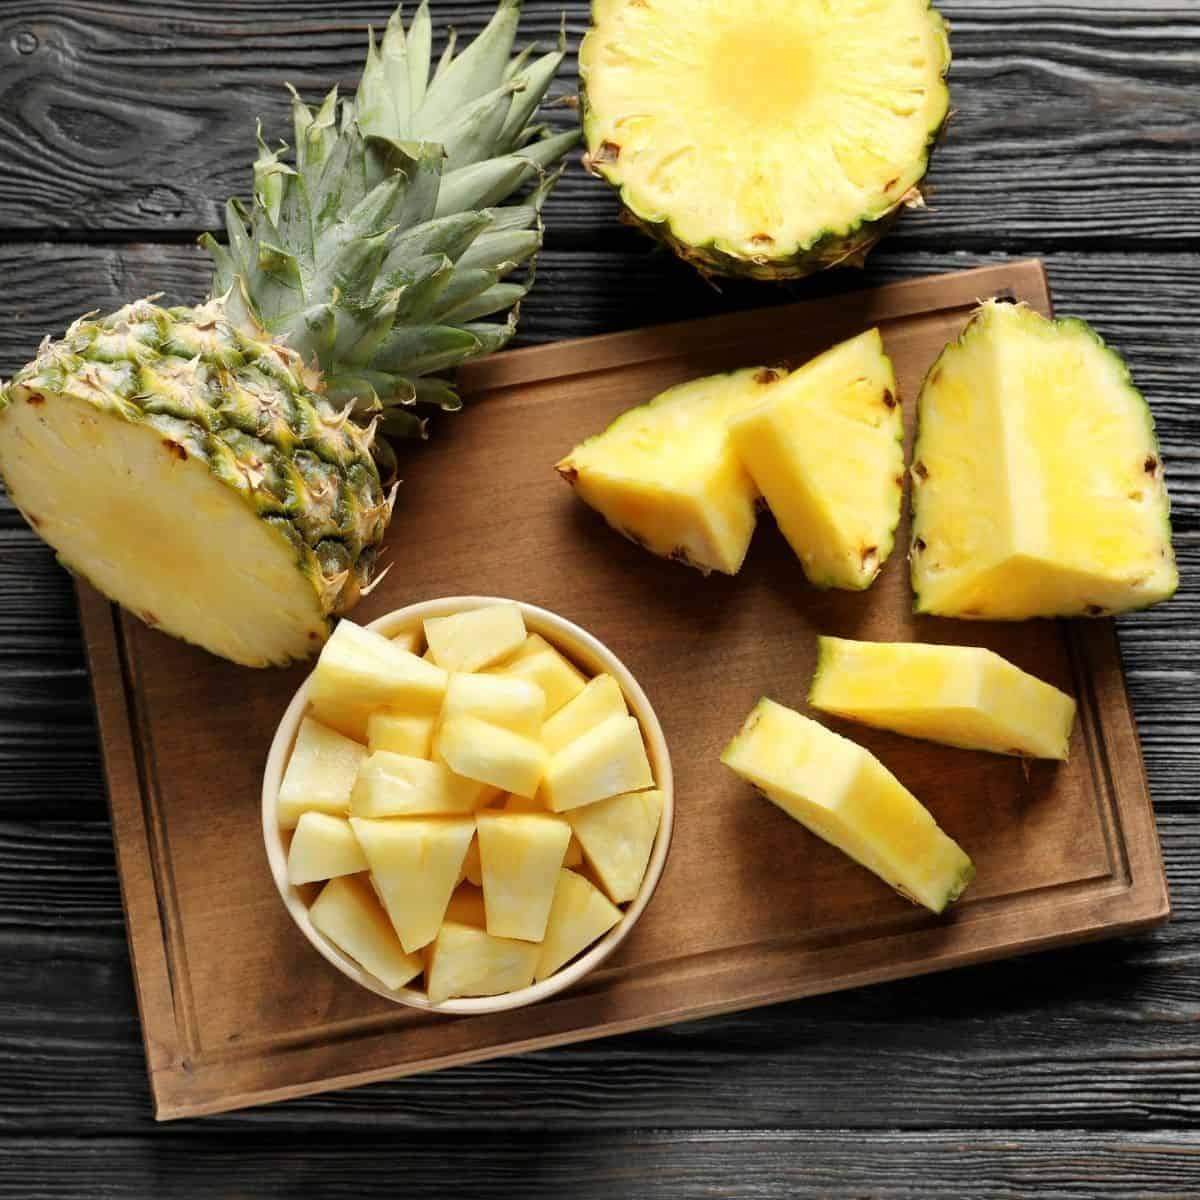 How To Store Pineapple In Fridge